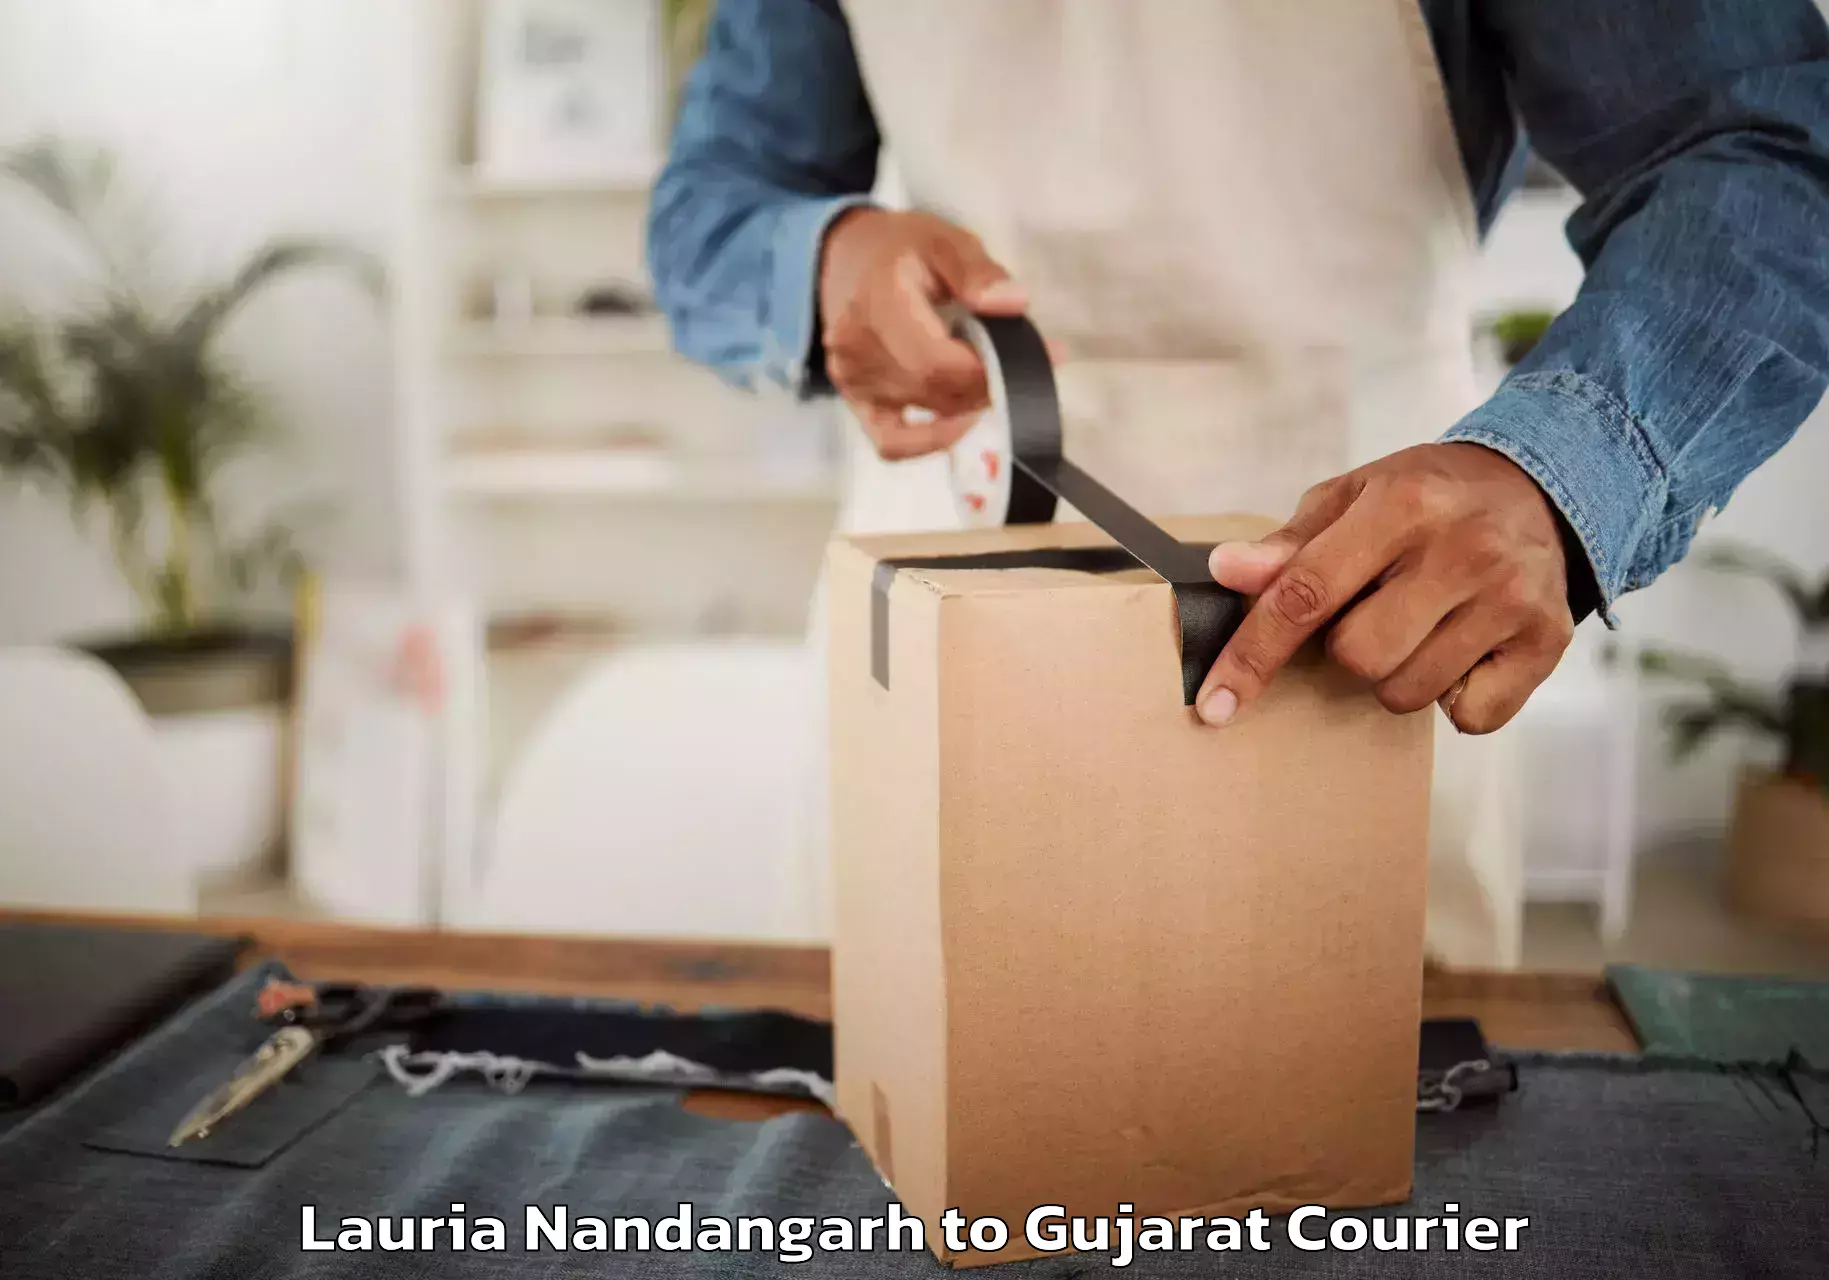 Professional moving assistance Lauria Nandangarh to Dhanera